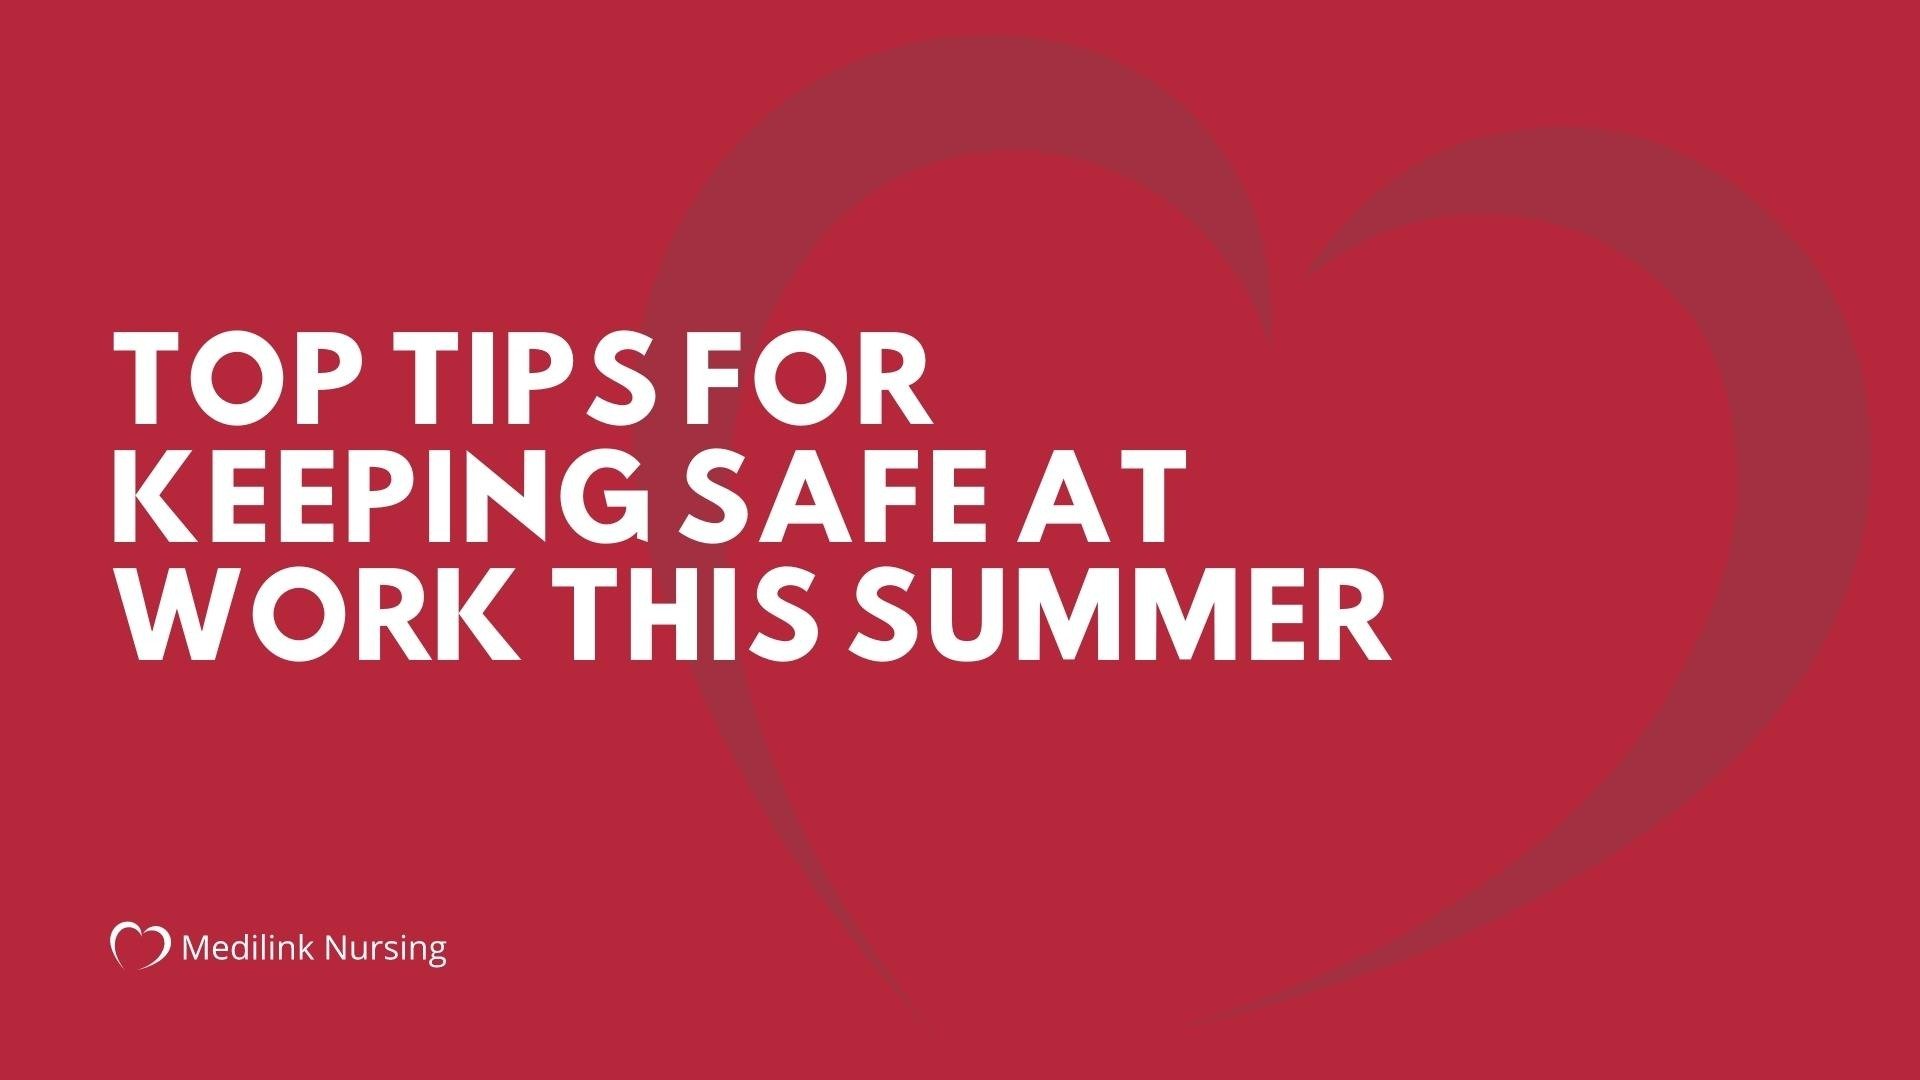 Top Tips for Keeping Safe at Work This Summer